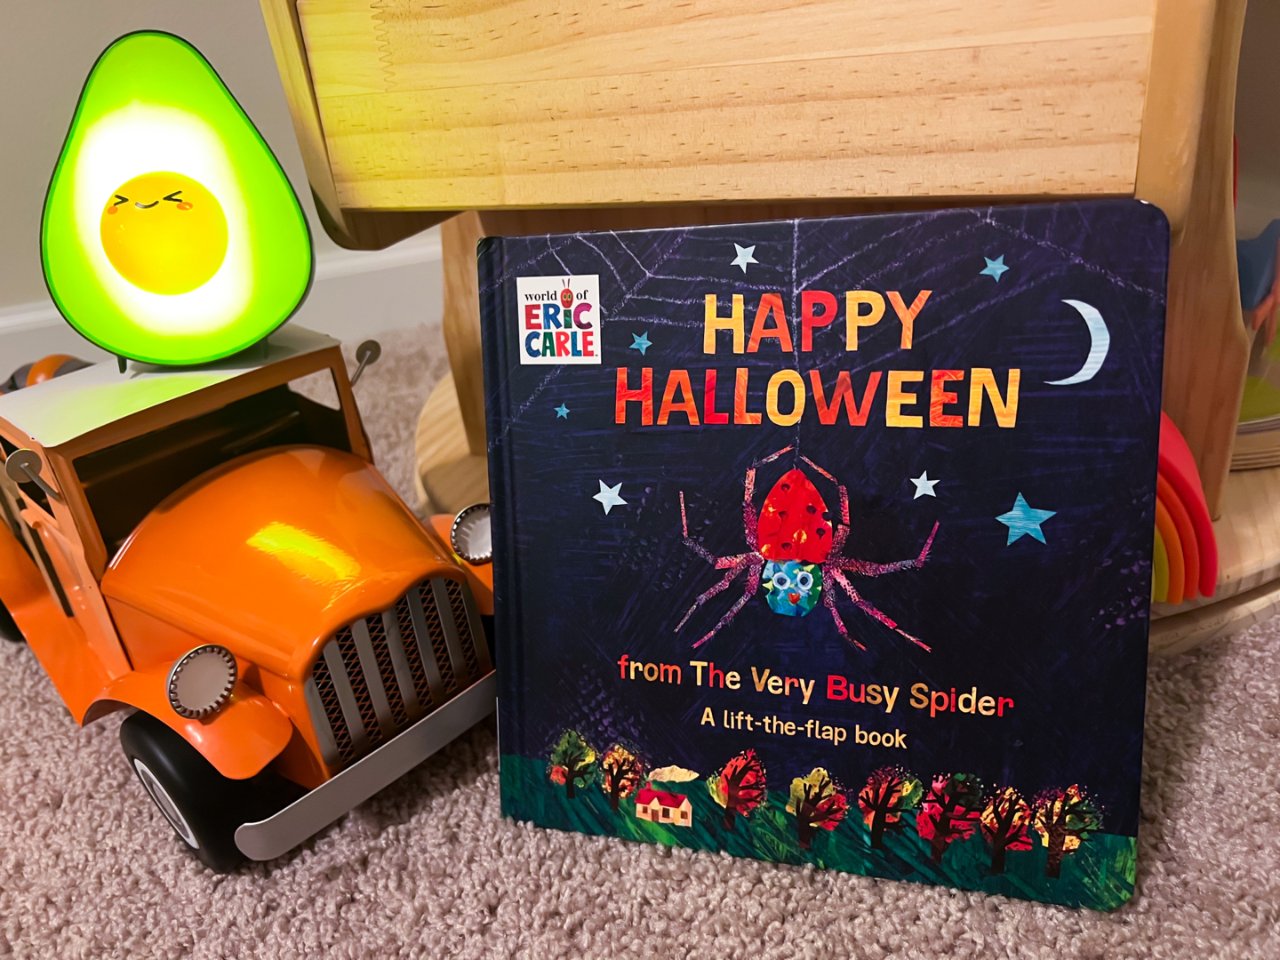 Happy Halloween from The Very Busy Spider: A Lift-the-Flap Book (The World of Eric Carle): Carle, Eric, Carle, Eric: 9780593097106: Amazon.com: Books